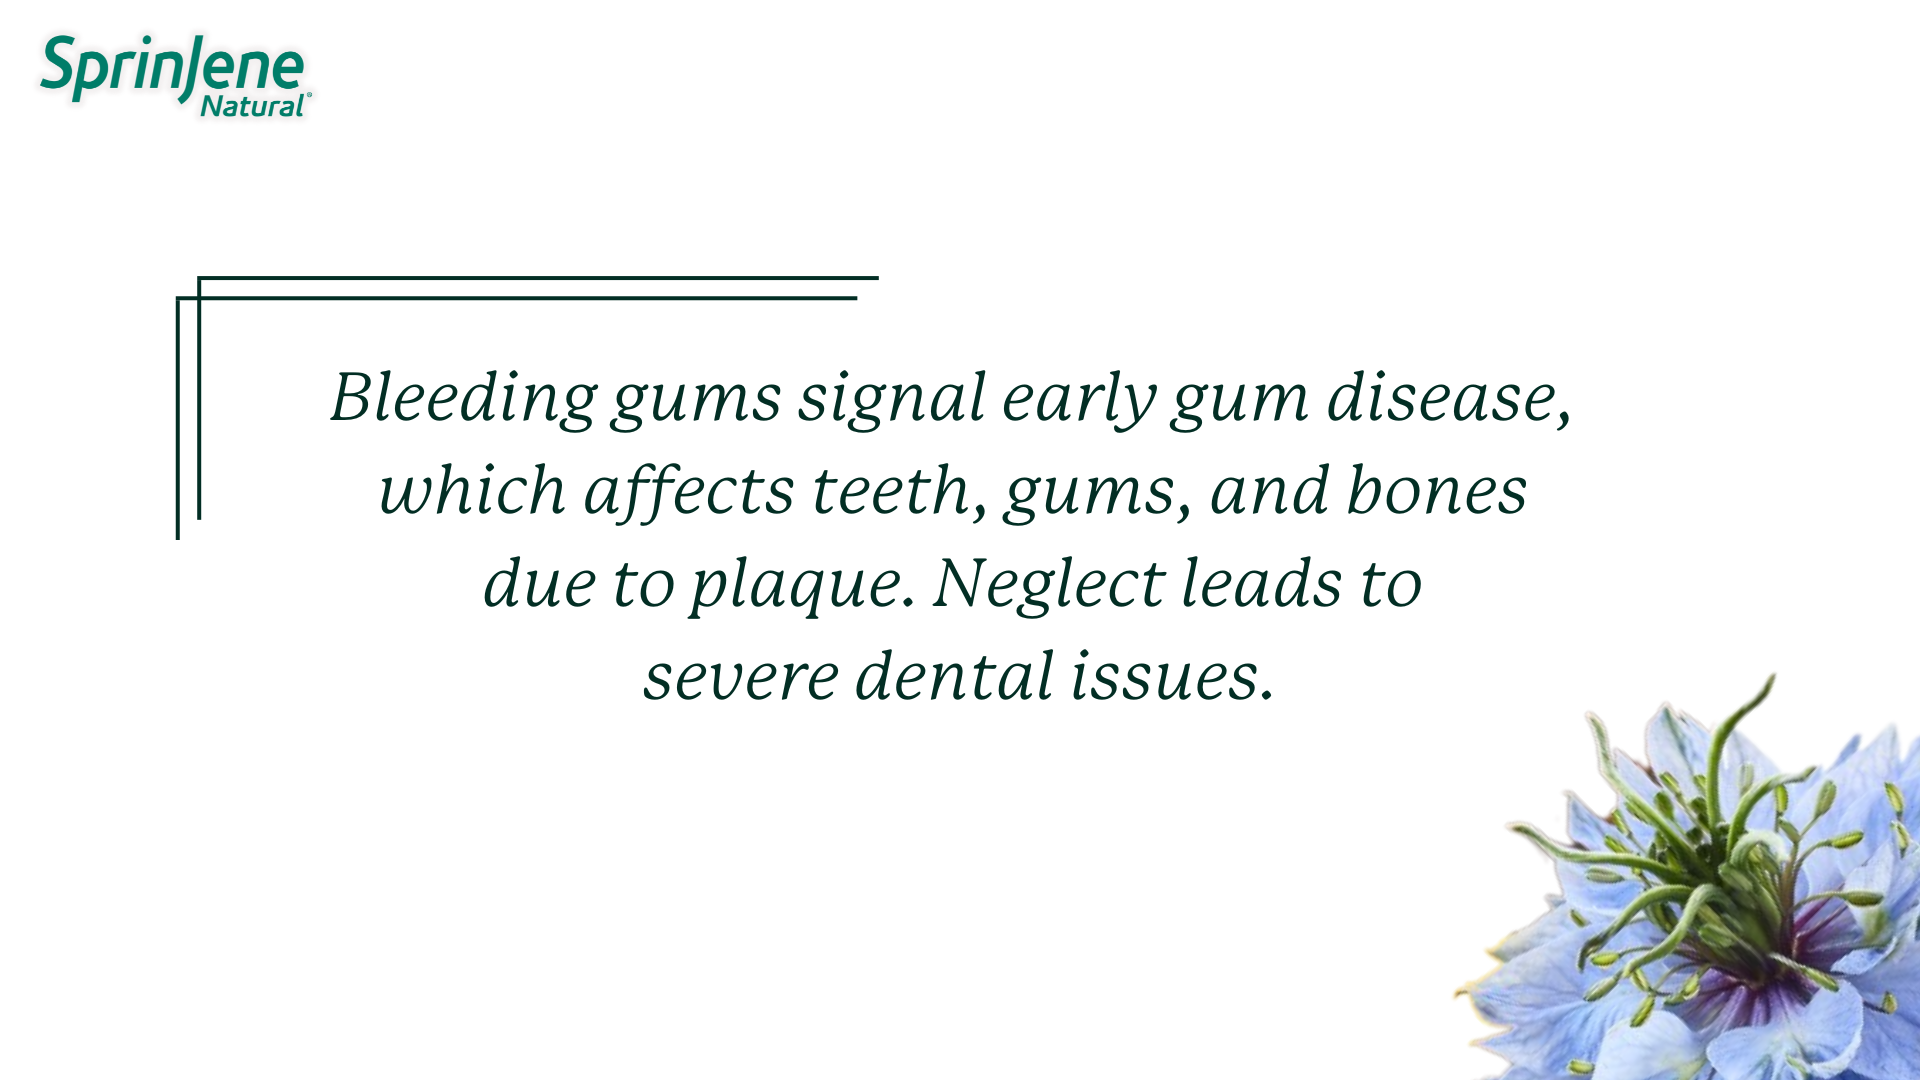 Bleeding gums signal early gum disease, which affects teeth, gums, and bones due to plaque. Neglect leads to severe dental issues.